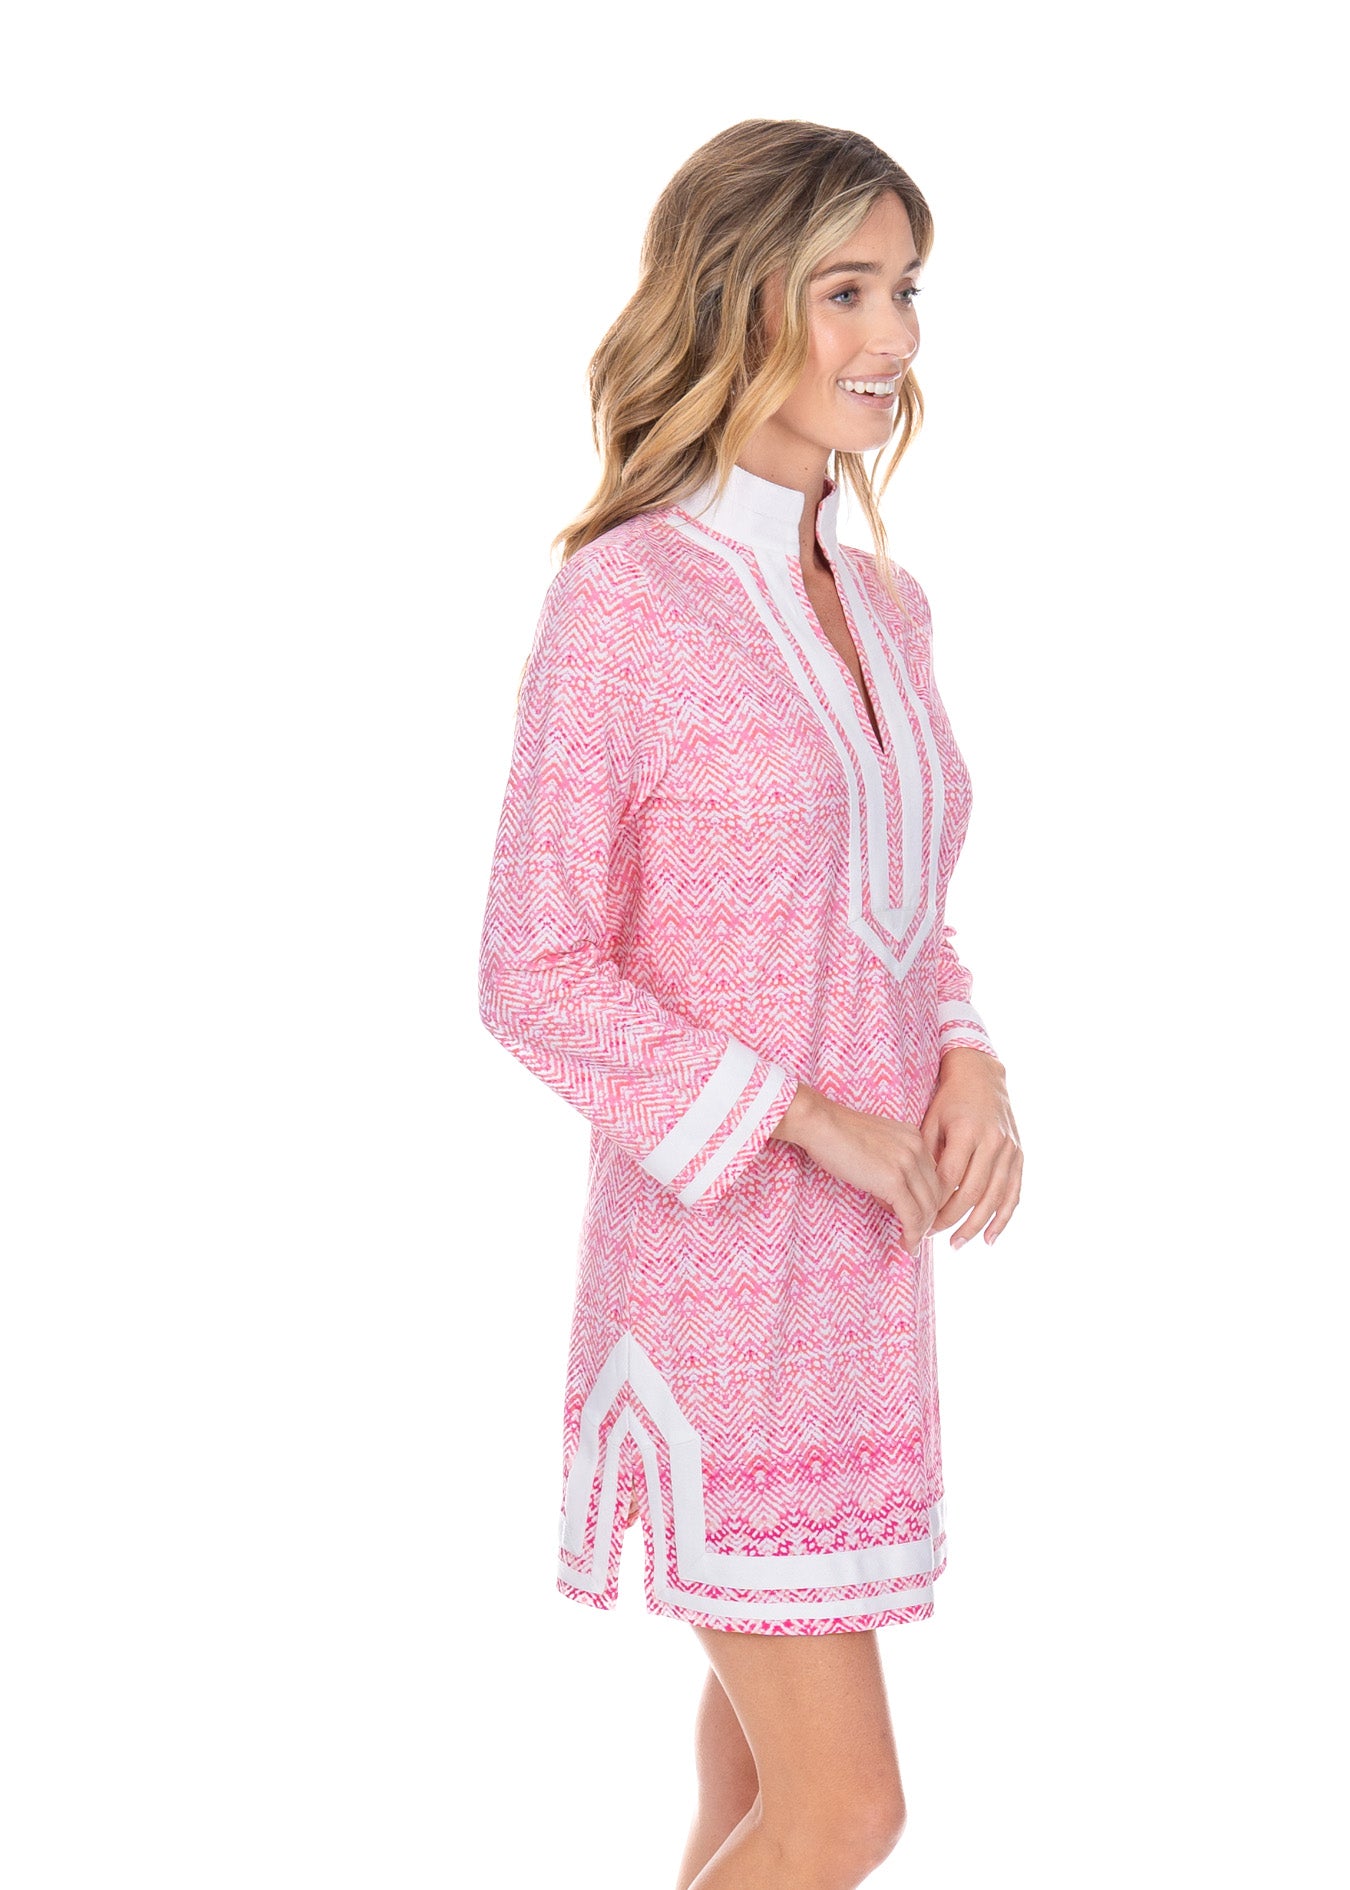 Blonde woman wearing the Algarve Tunic Dress while facing the side